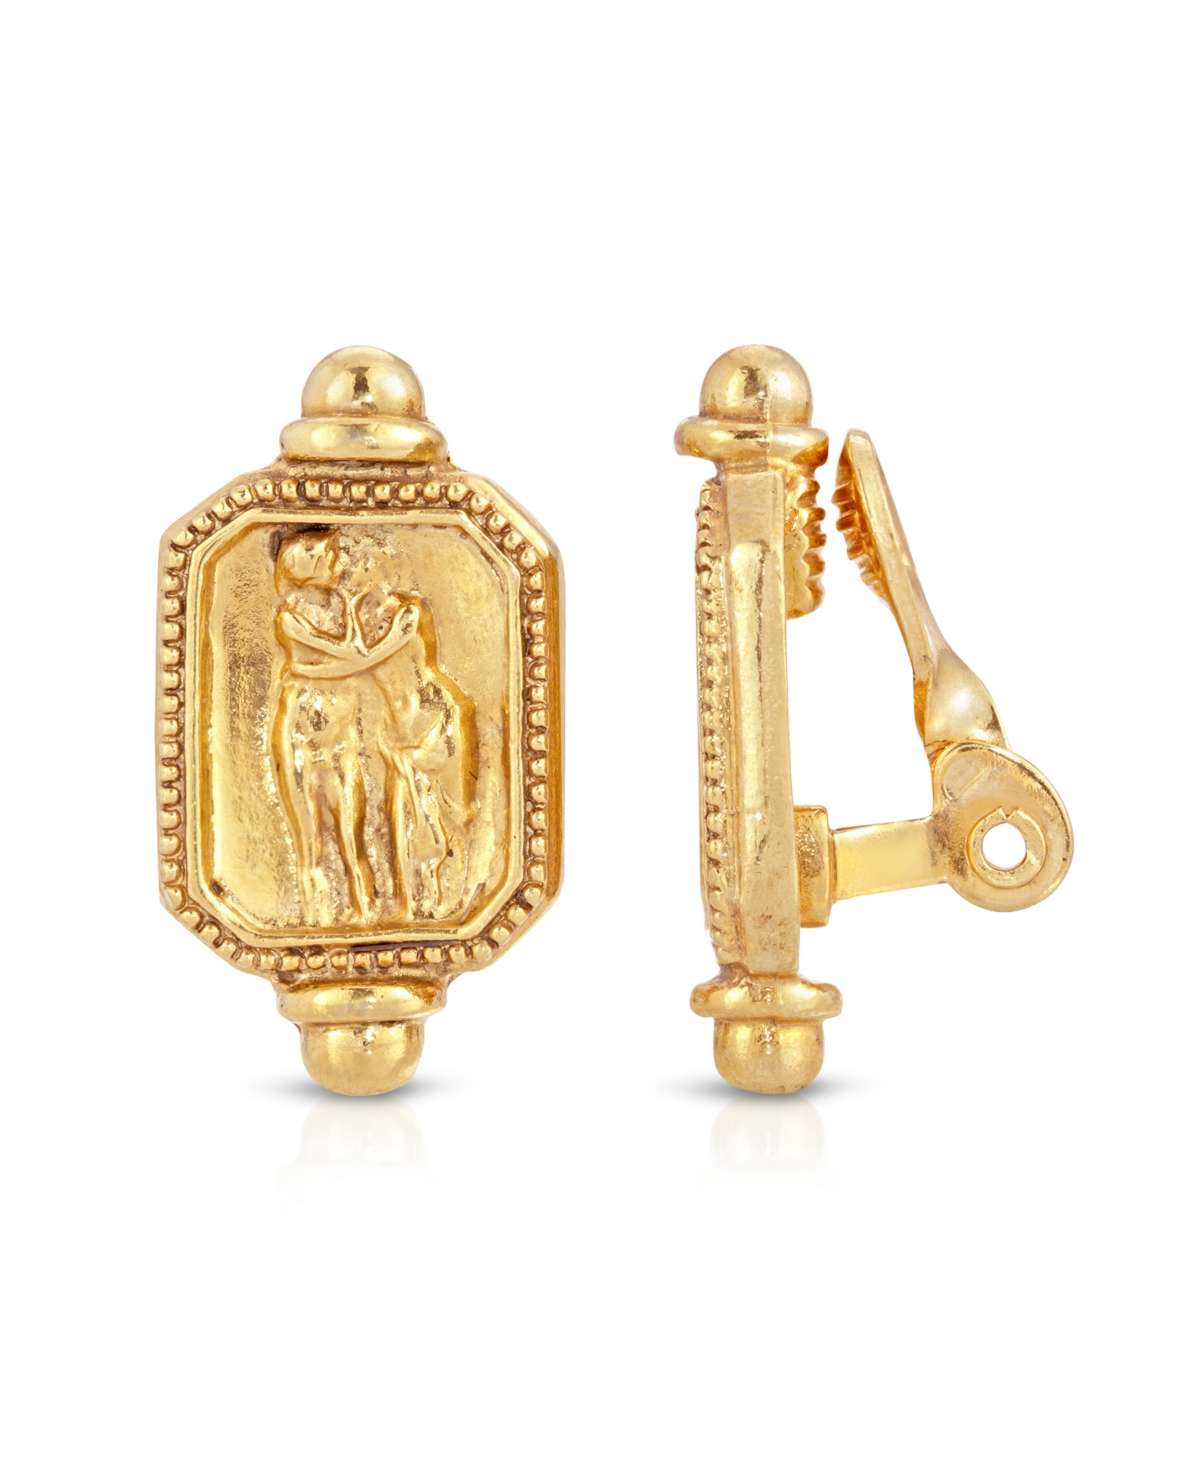 Gold Tone Adoration Clip Earrings - Gold